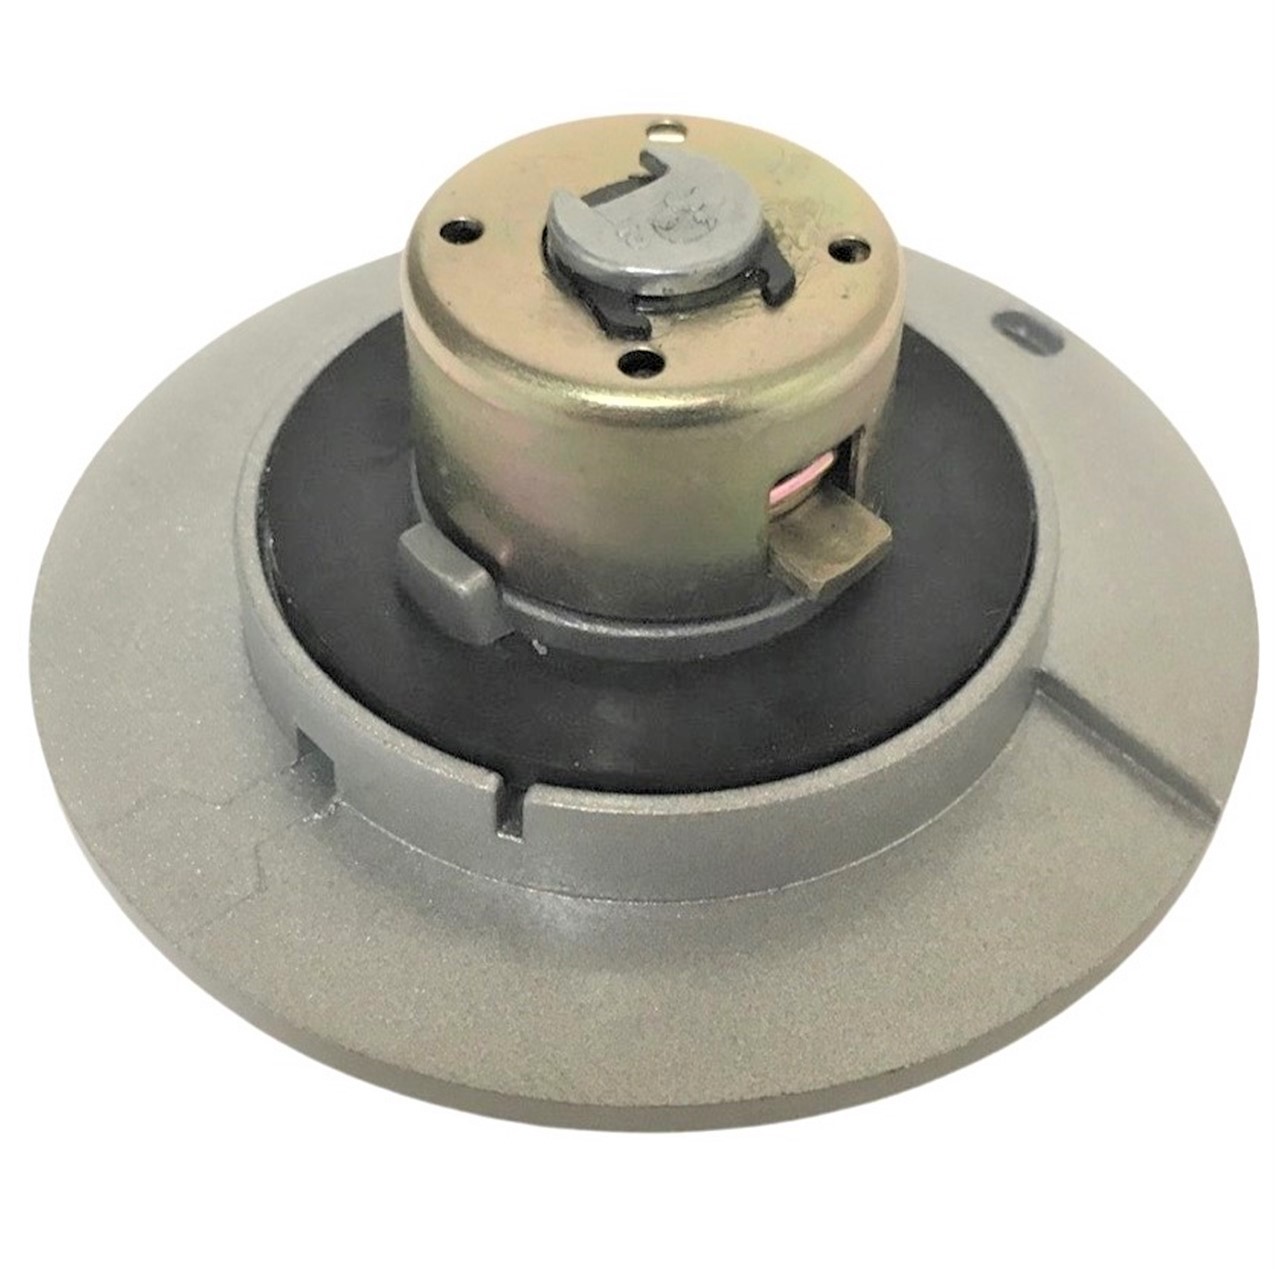 Ignition Switch Fits Many ATVs With 38mm Gas Cap 4 pin in 4 Pin Female jack - Click Image to Close